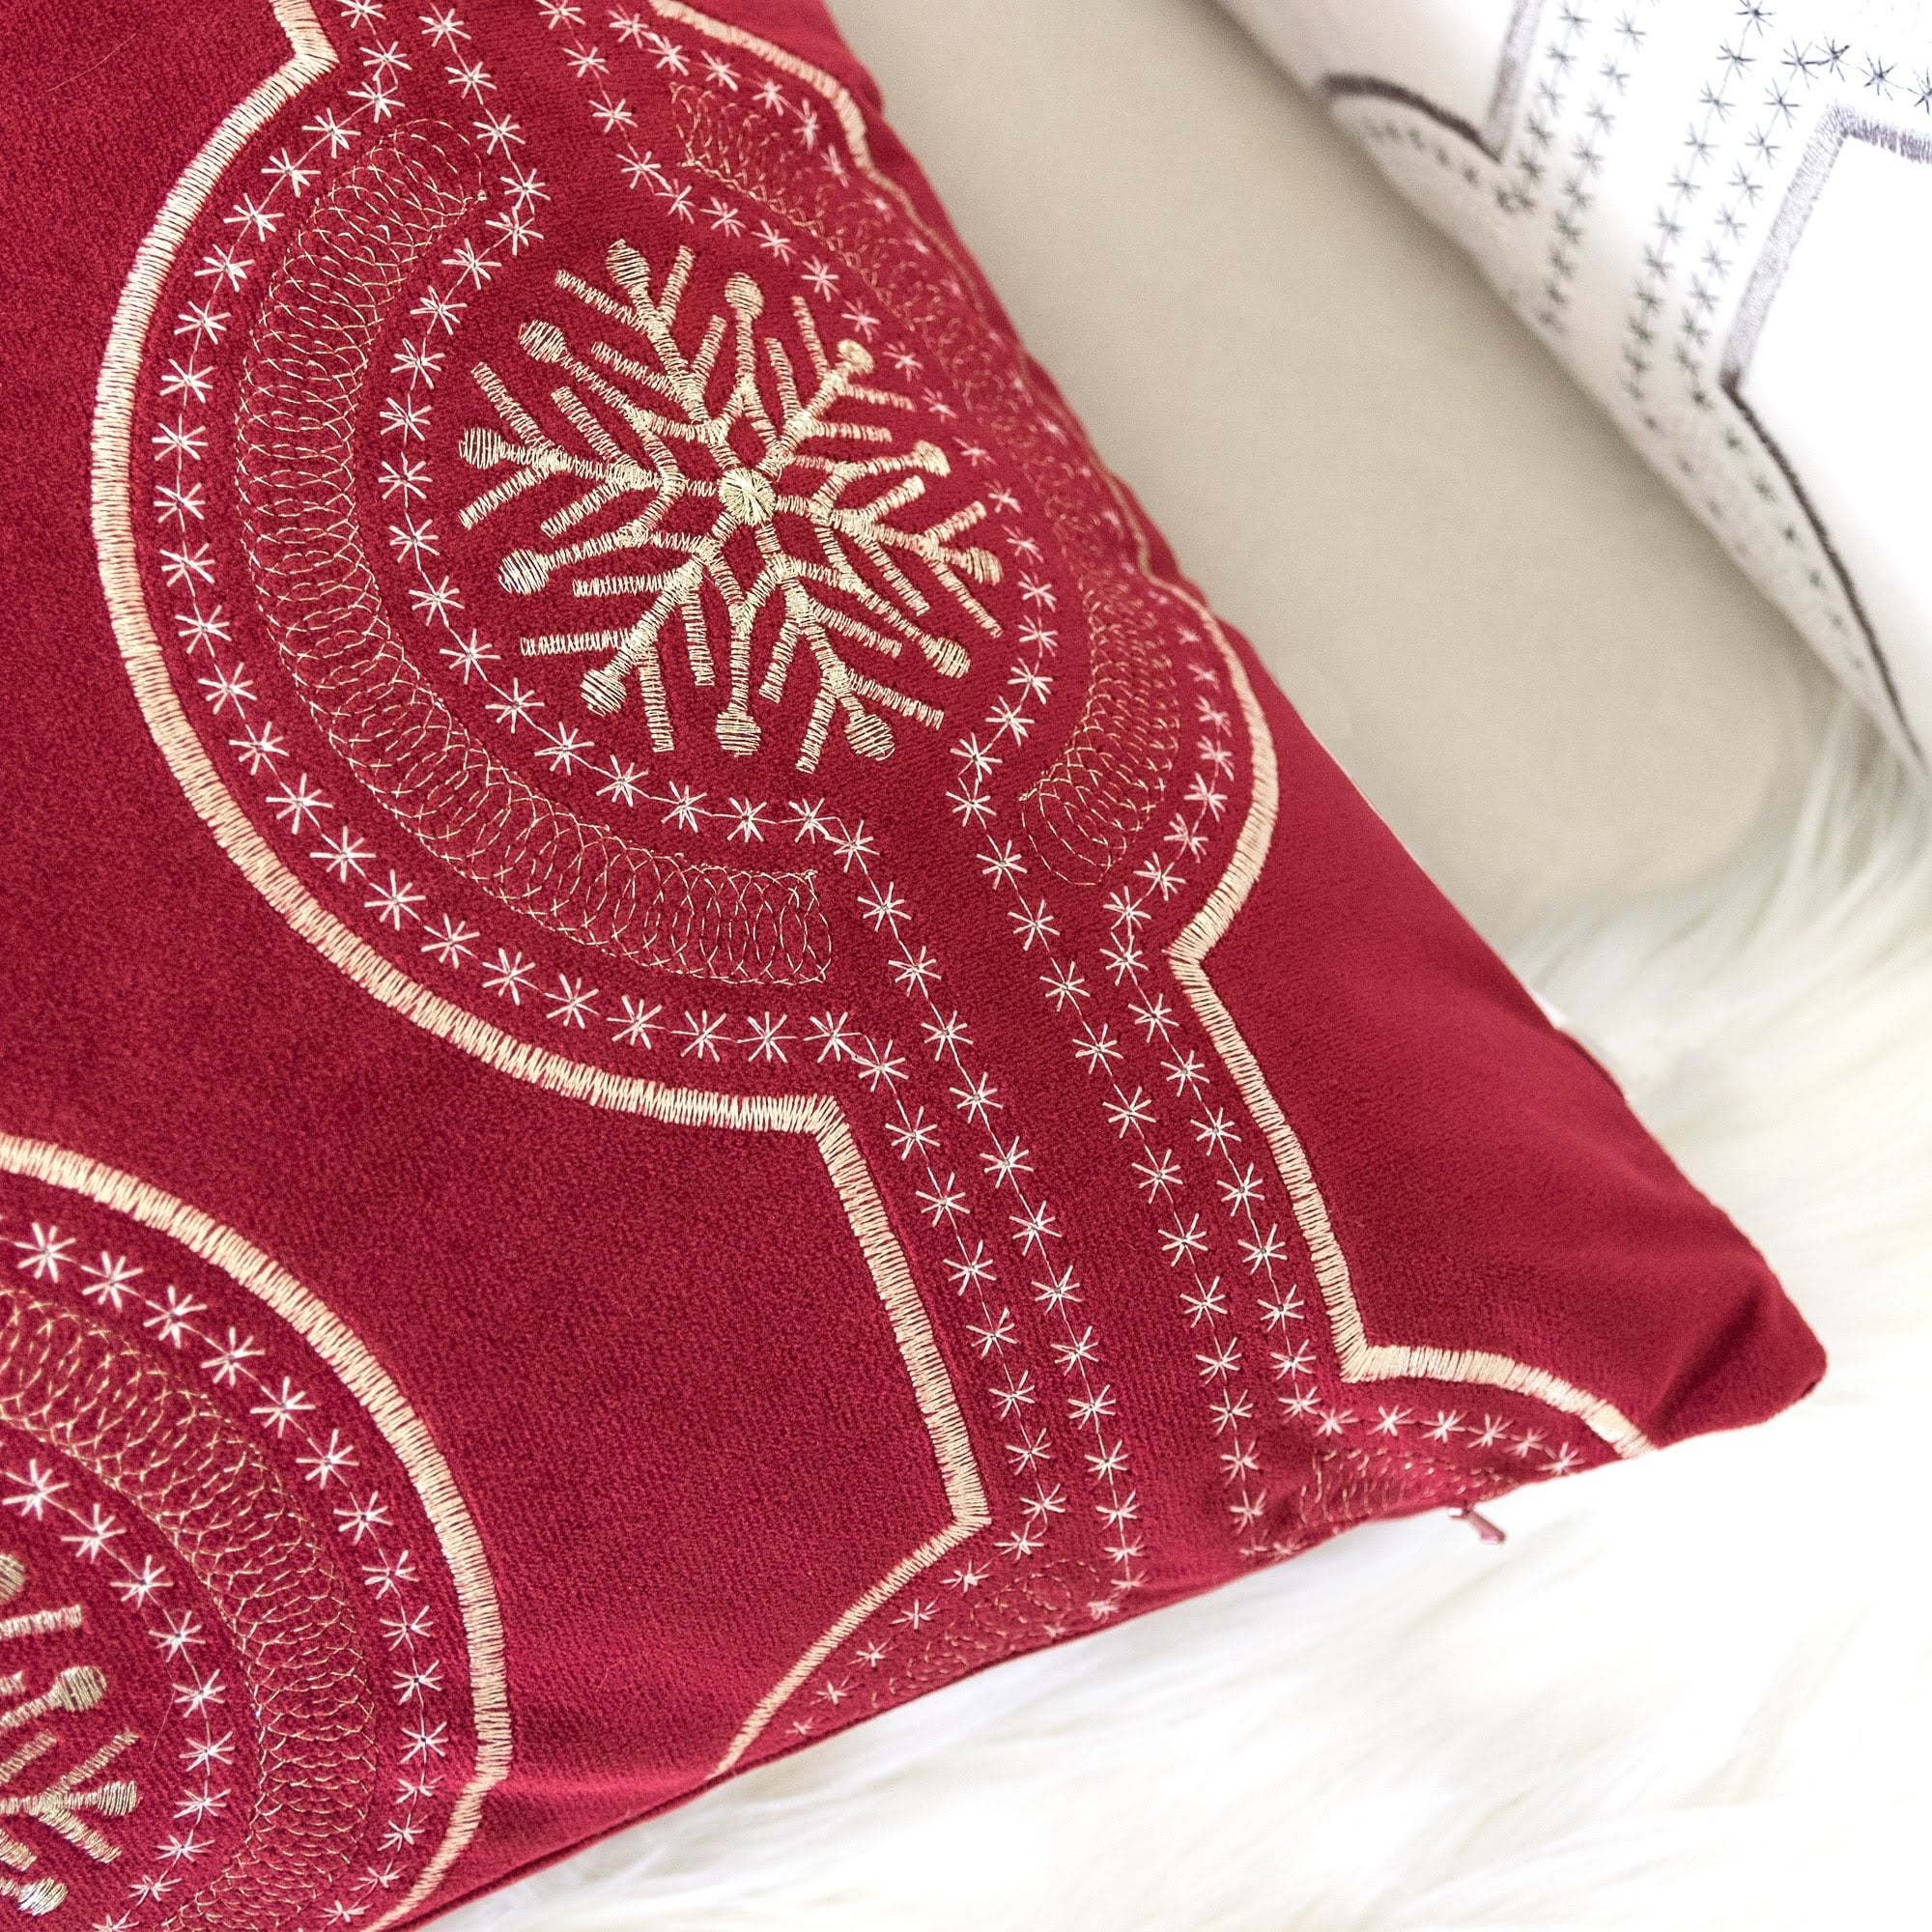 https://ak1.ostkcdn.com/images/products/is/images/direct/f6cb29d8bf55a25d31bf2c6d9579a2b607e8c495/Lydia-Christmas-Holiday-Oversized-Pillow-with-Insert.jpg